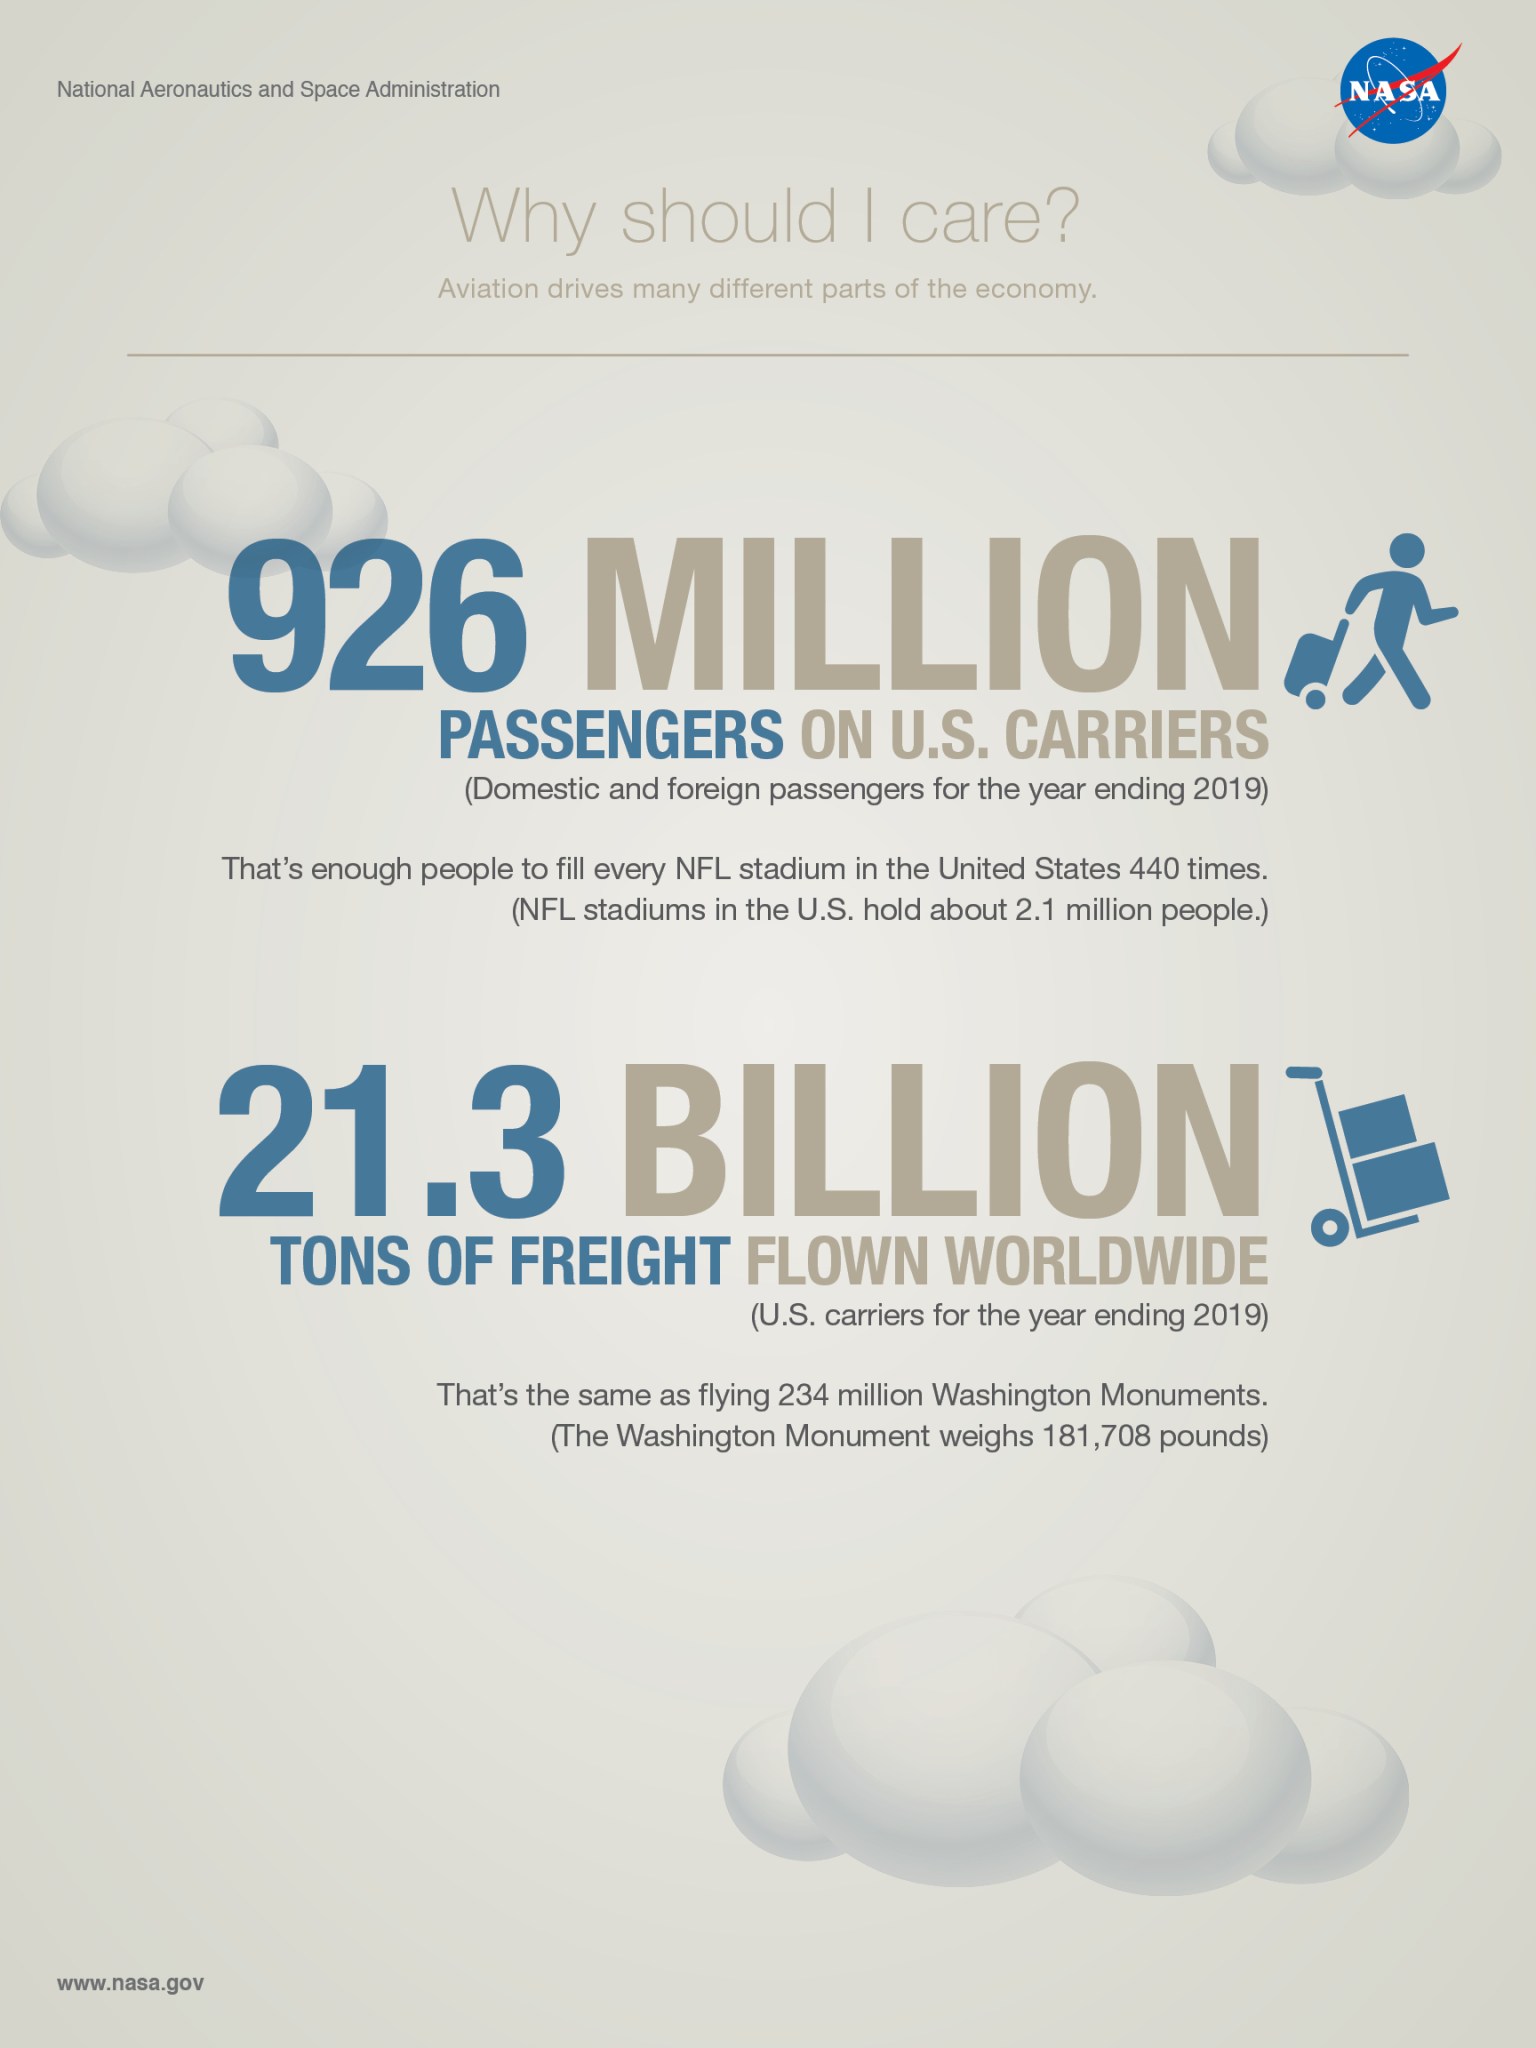 ARMD Infographic on Why should I care? Aviation drives many different parts of the economy.